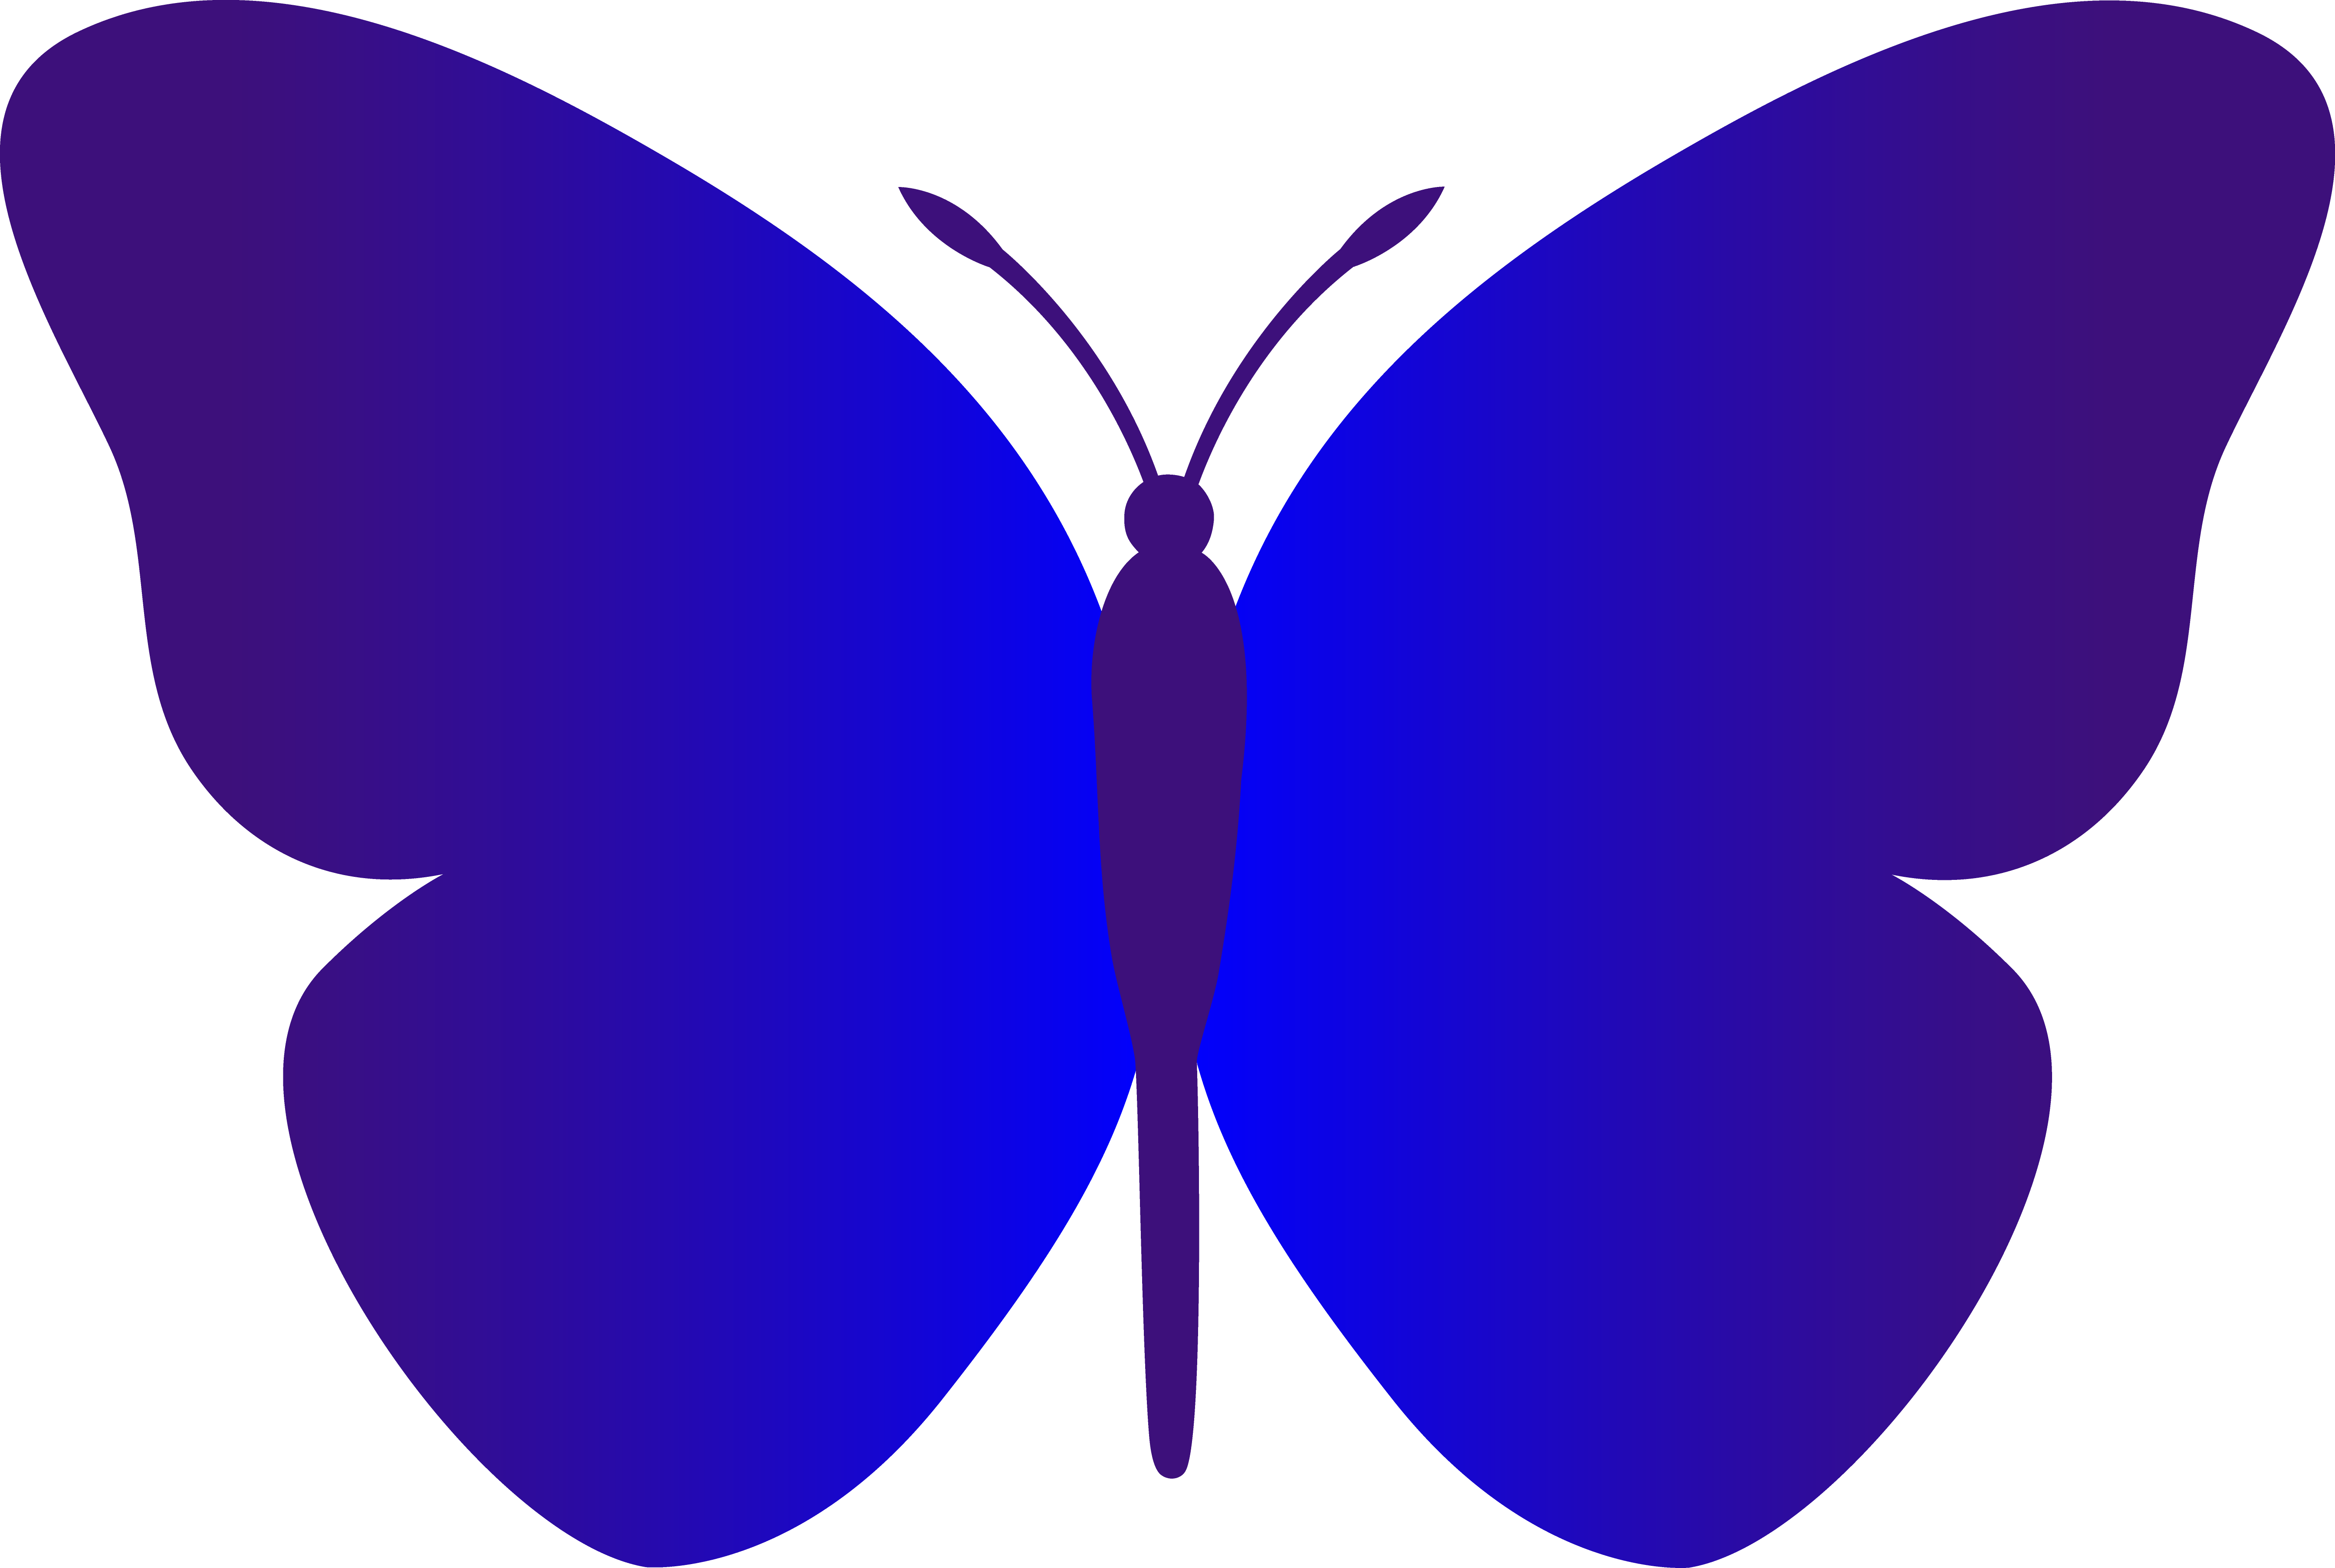 Blue Butterfly Images | Free Download Clip Art | Free Clip Art ...